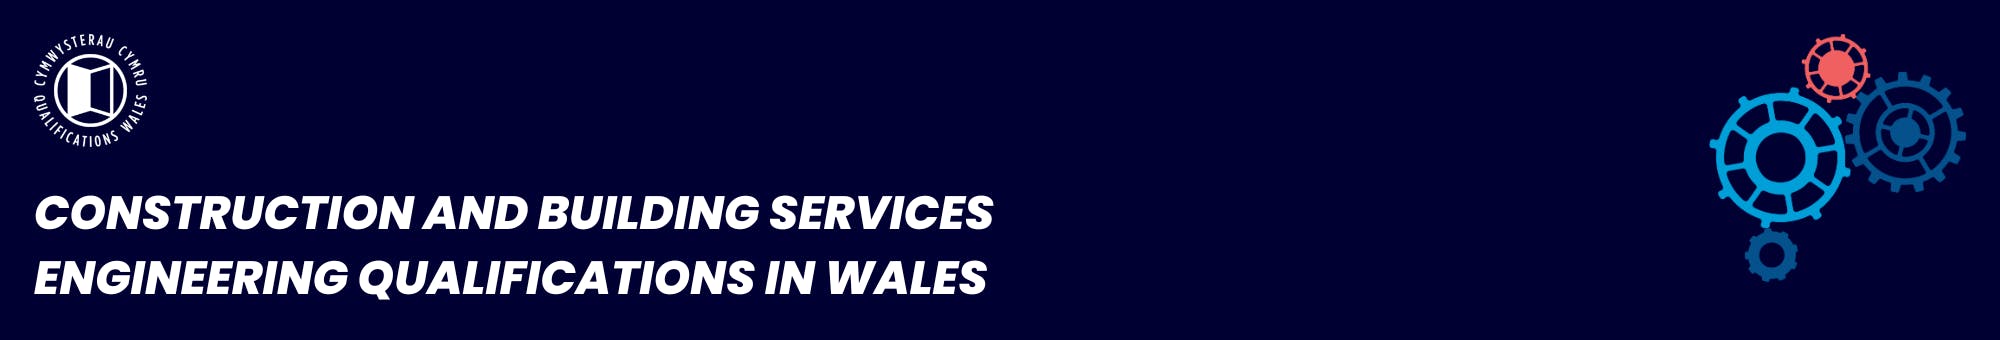 Construction and Building Services Engineering Qualifications in Wales